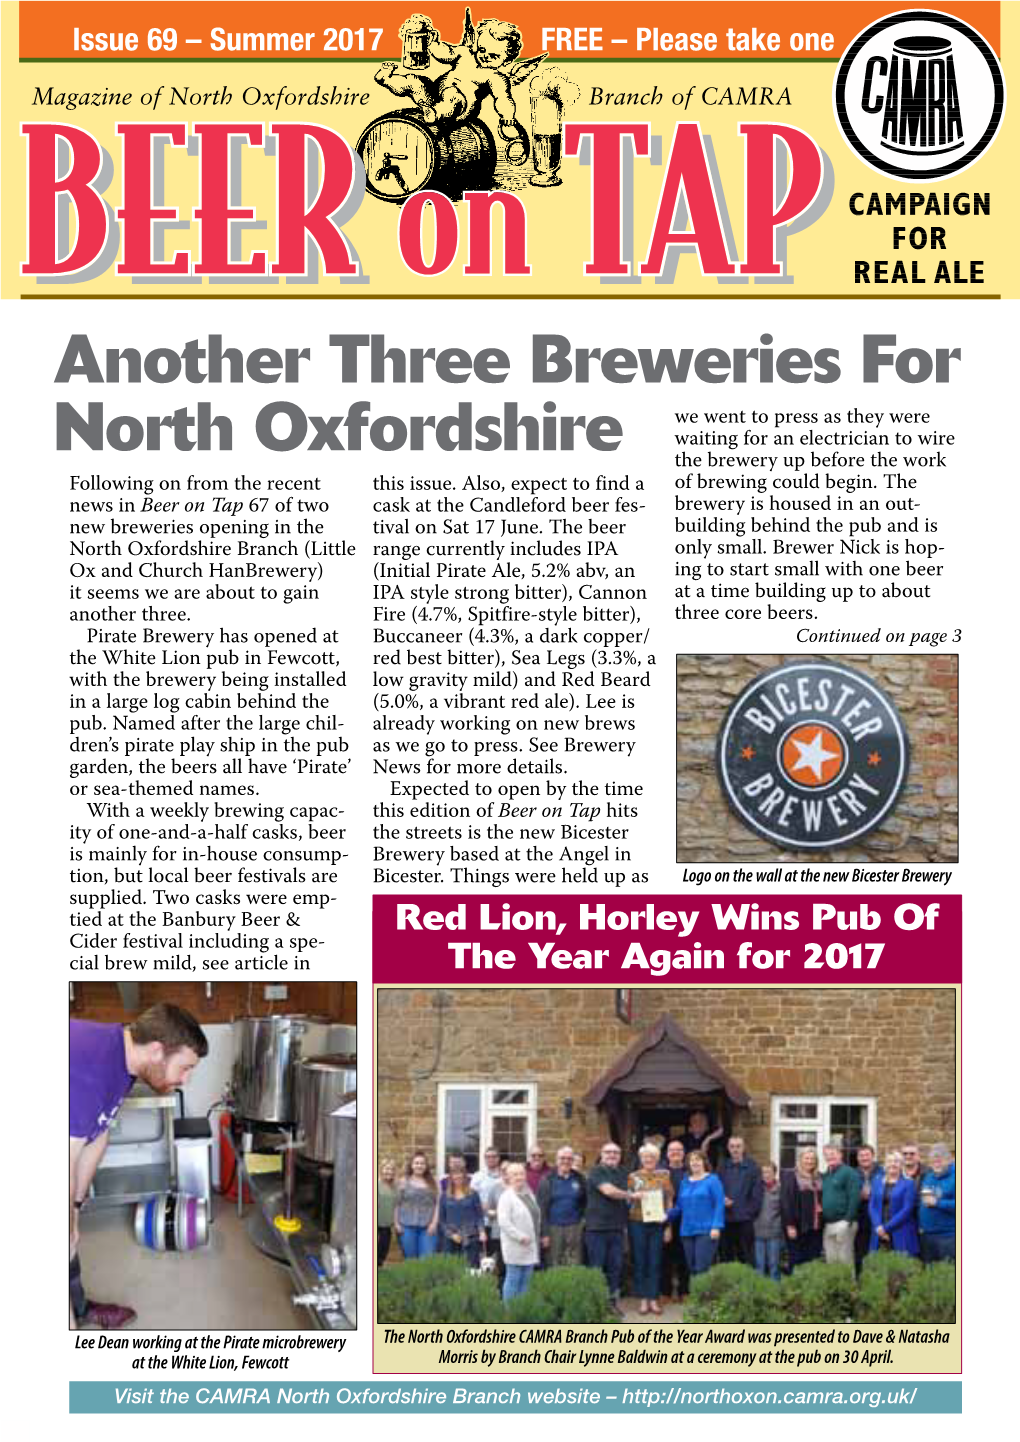 Another Three Breweries for North Oxfordshire